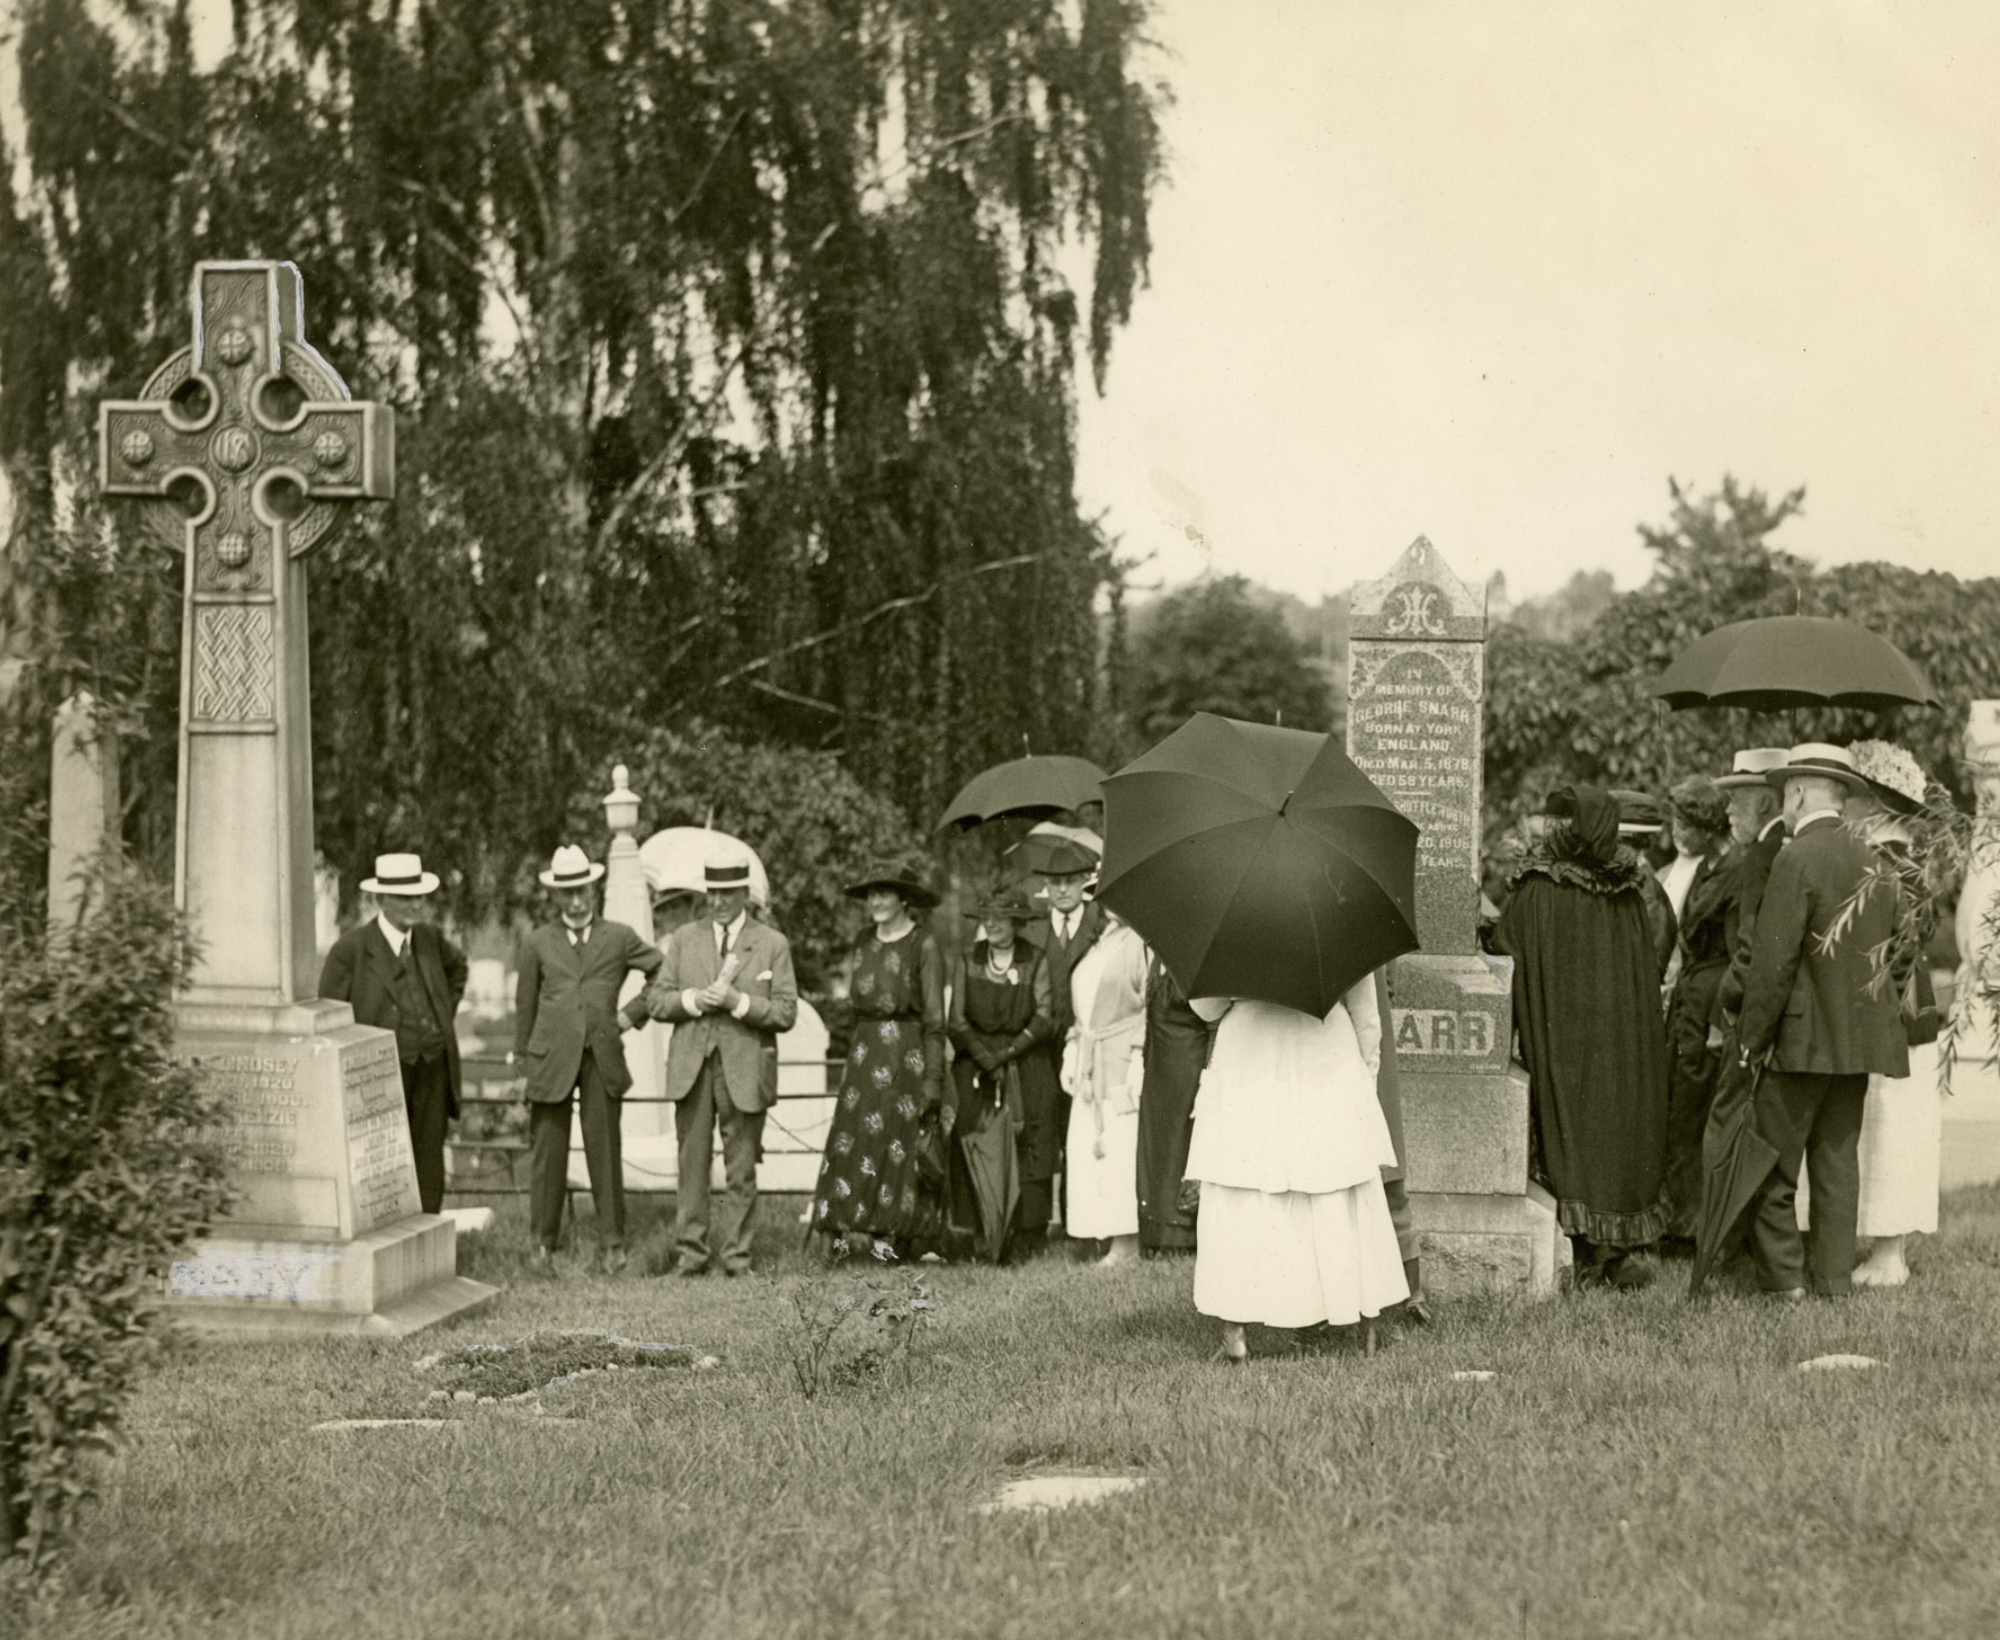 Black and white image of men and women surrounding a grave approximately 12 feet tall topped with a Celtic cross. The people are wearing black and white clothing and some are carrying black umbrellas. Other graves are visible around them.